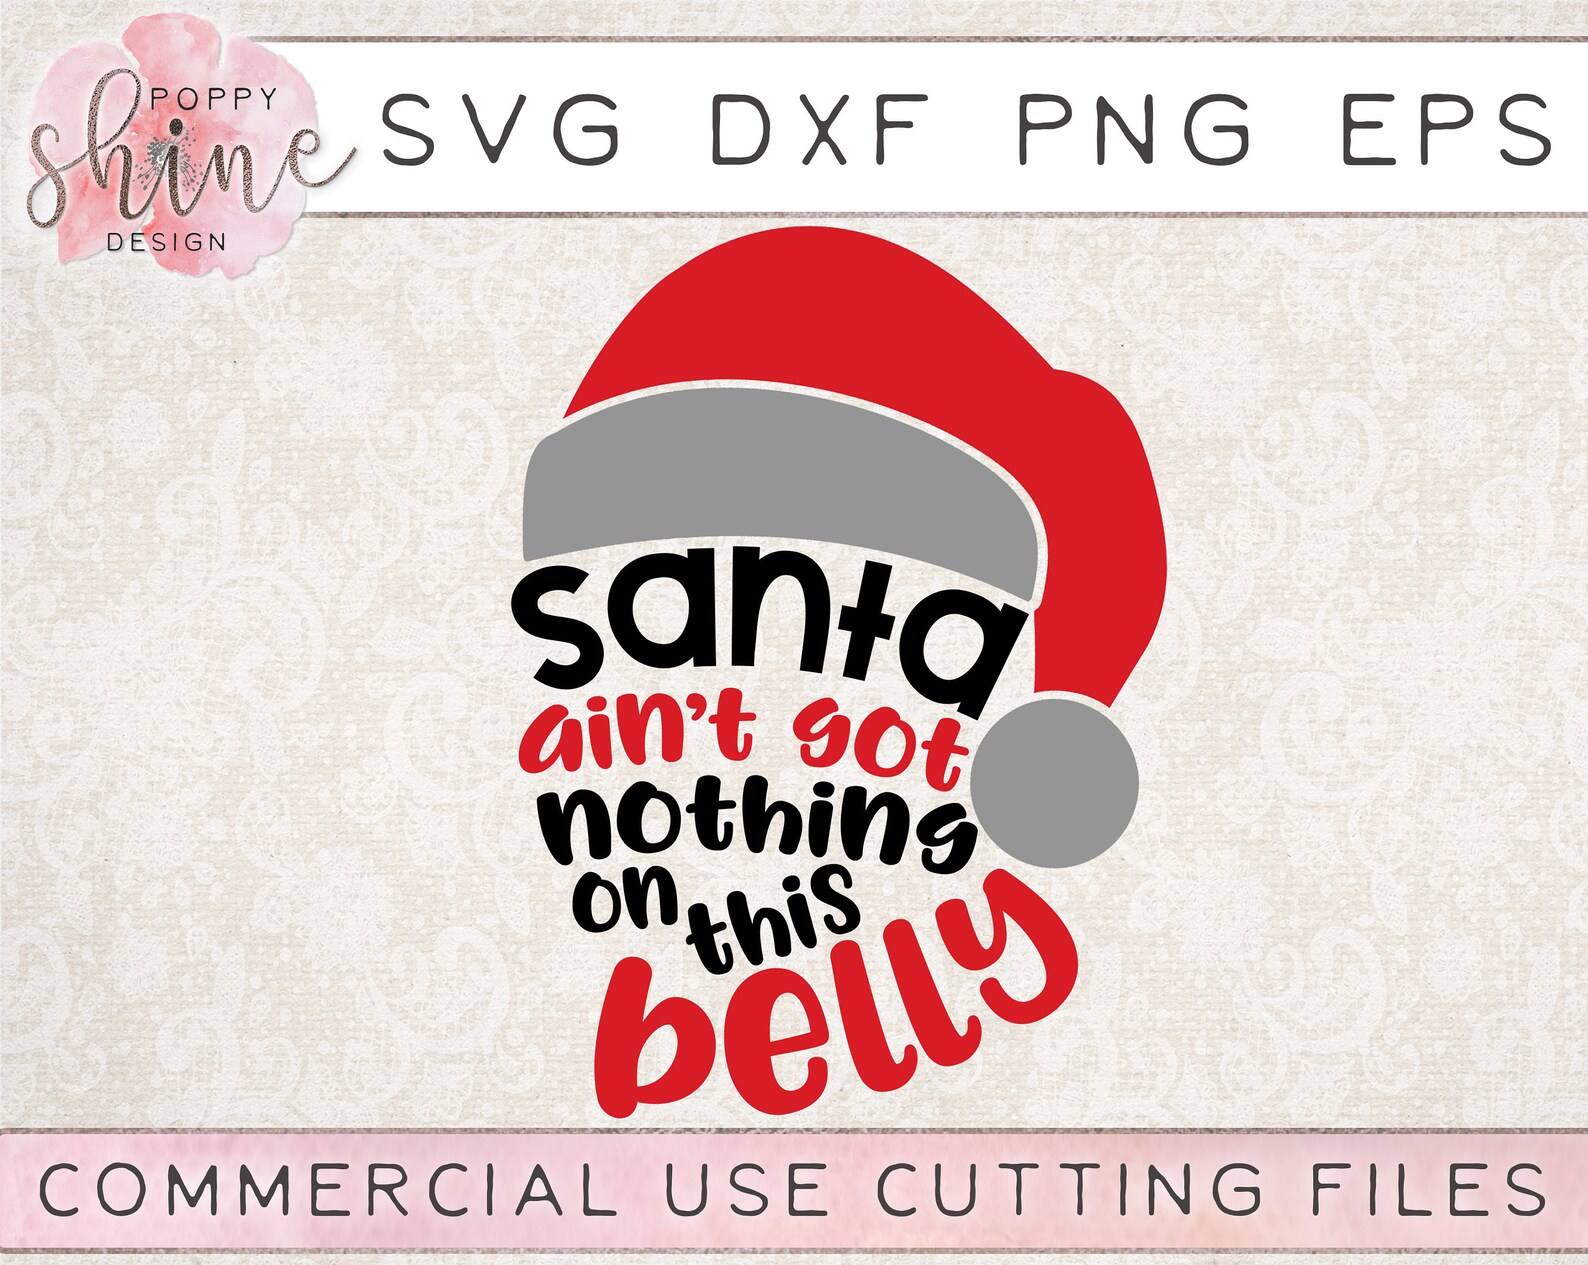 Santa Ain T Got Nothing On This Belly Svg Dxf Png Eps Etsy